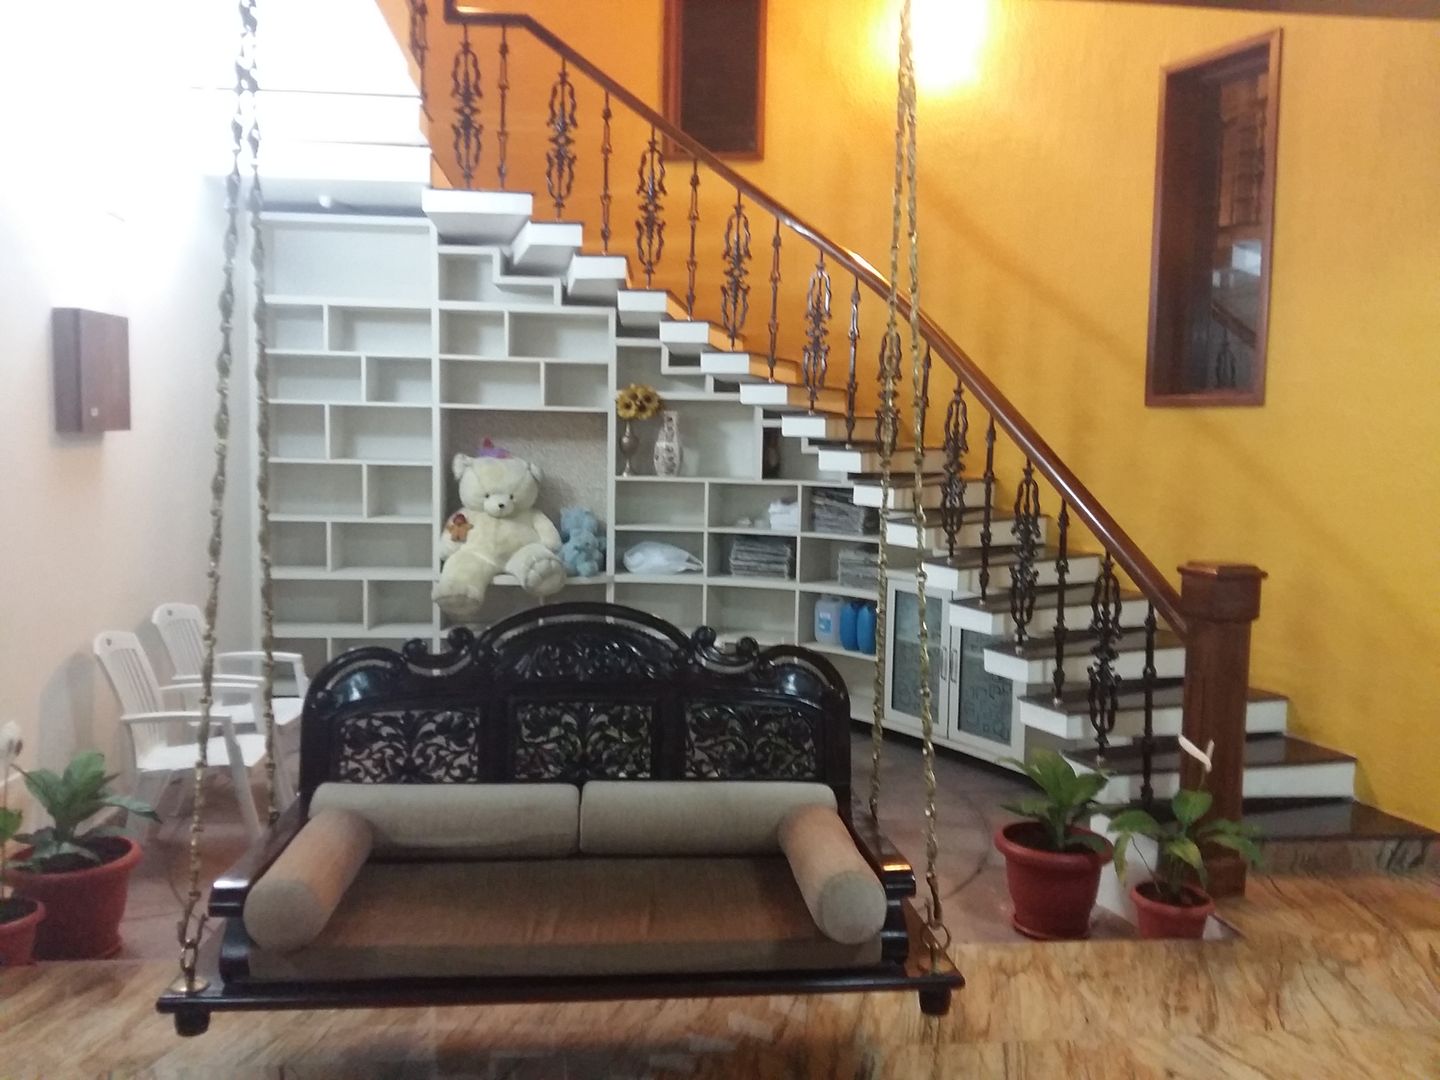 ANUGRAHA - RESIDENCE FOR MR.MUKUND, One Brick At A Time One Brick At A Time Escalier